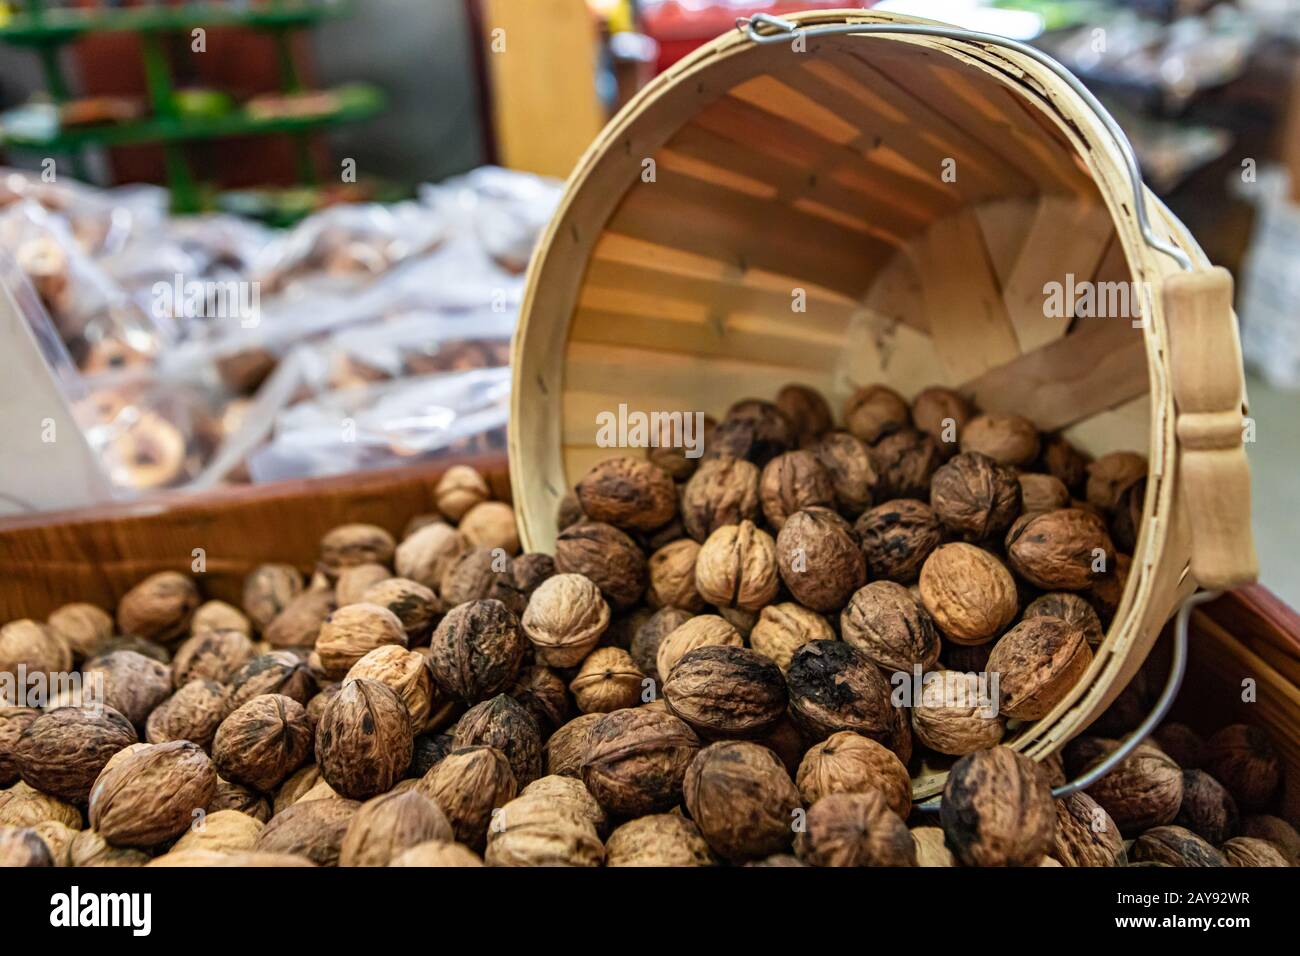 Dried fruit on sale at the local food market. Walnuts coming out of a round wooden basket. Natural snack or ingredient, healthy eating. Superfood. Stock Photo